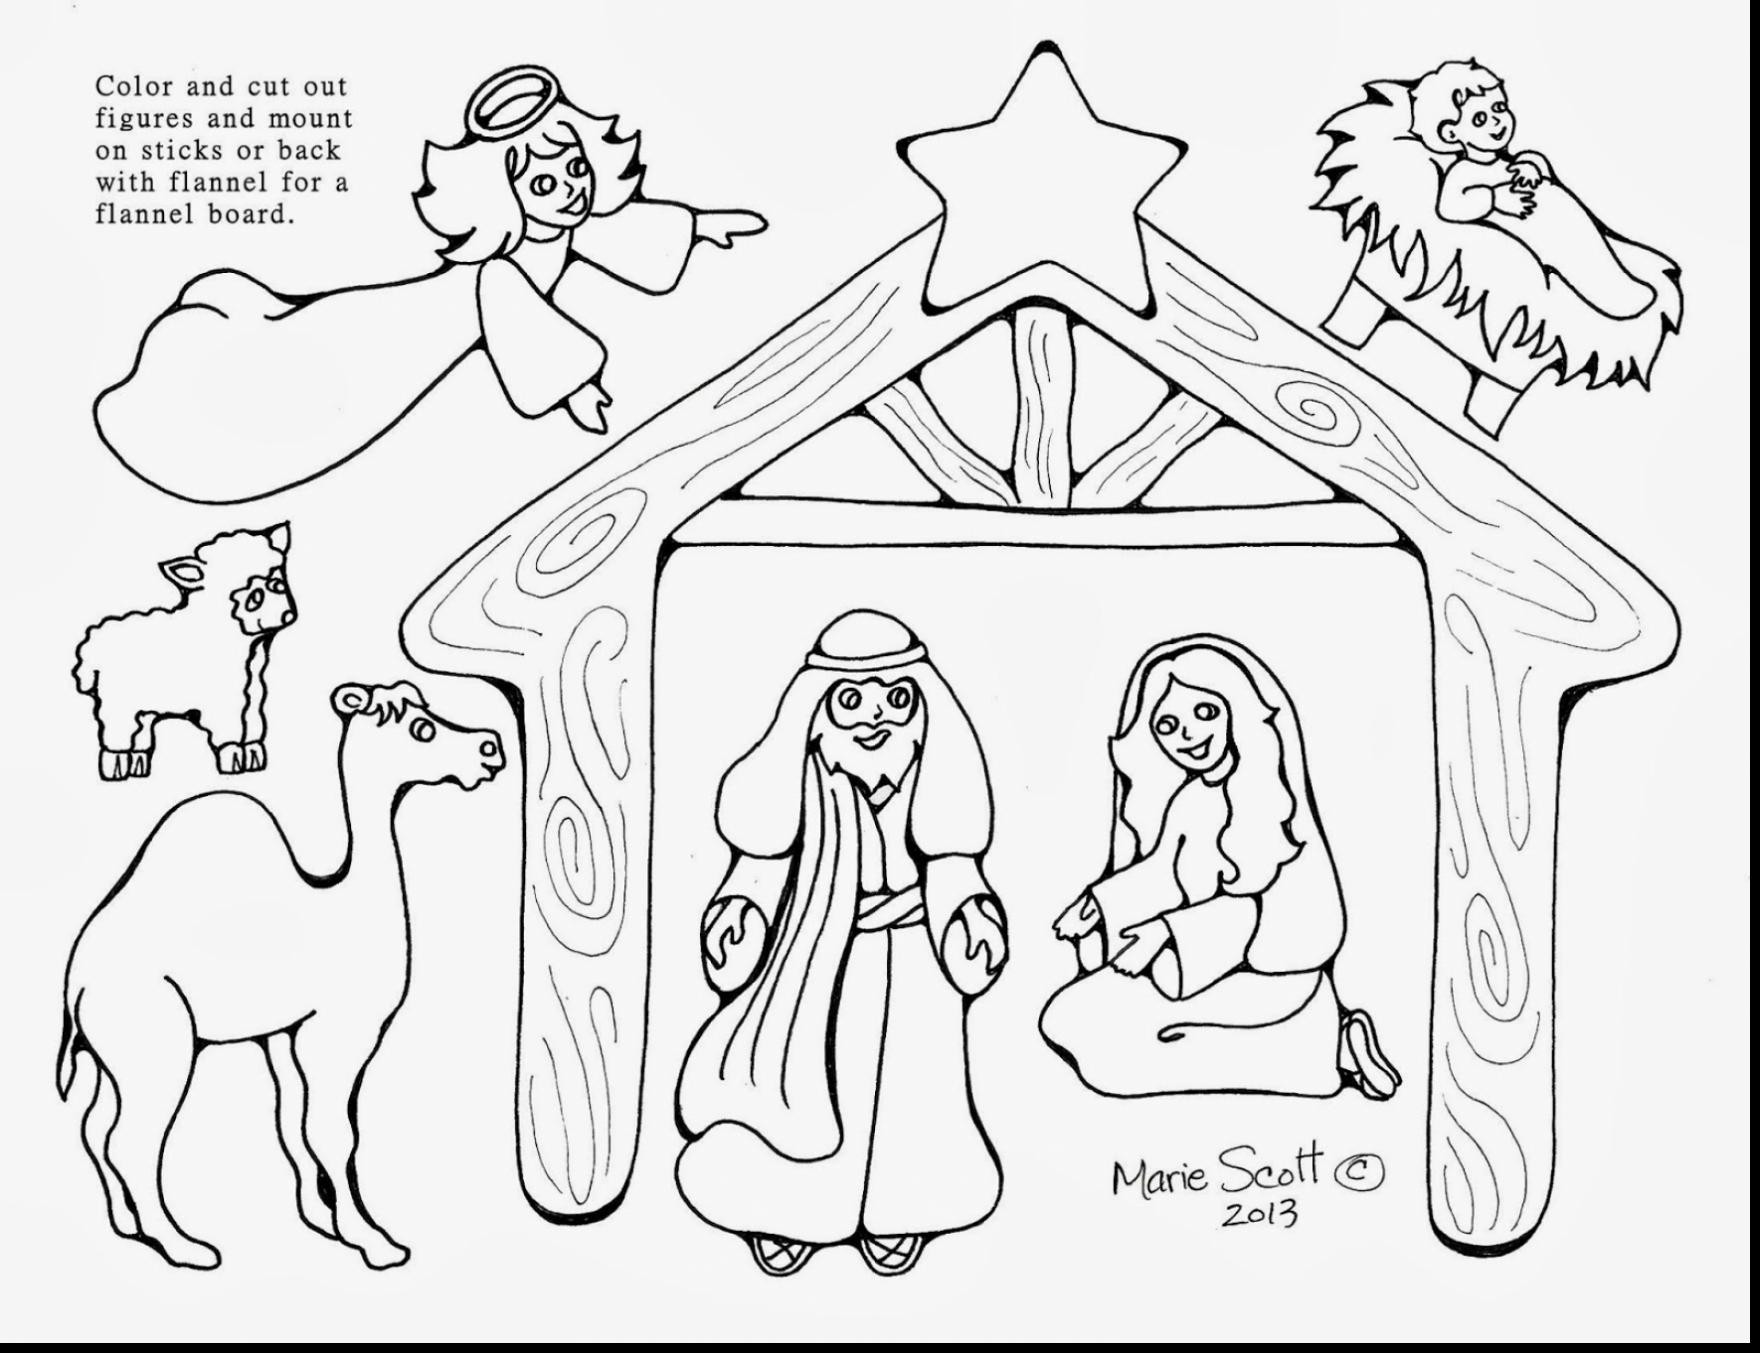 Printable Nativity Scene Coloring Pages at Free